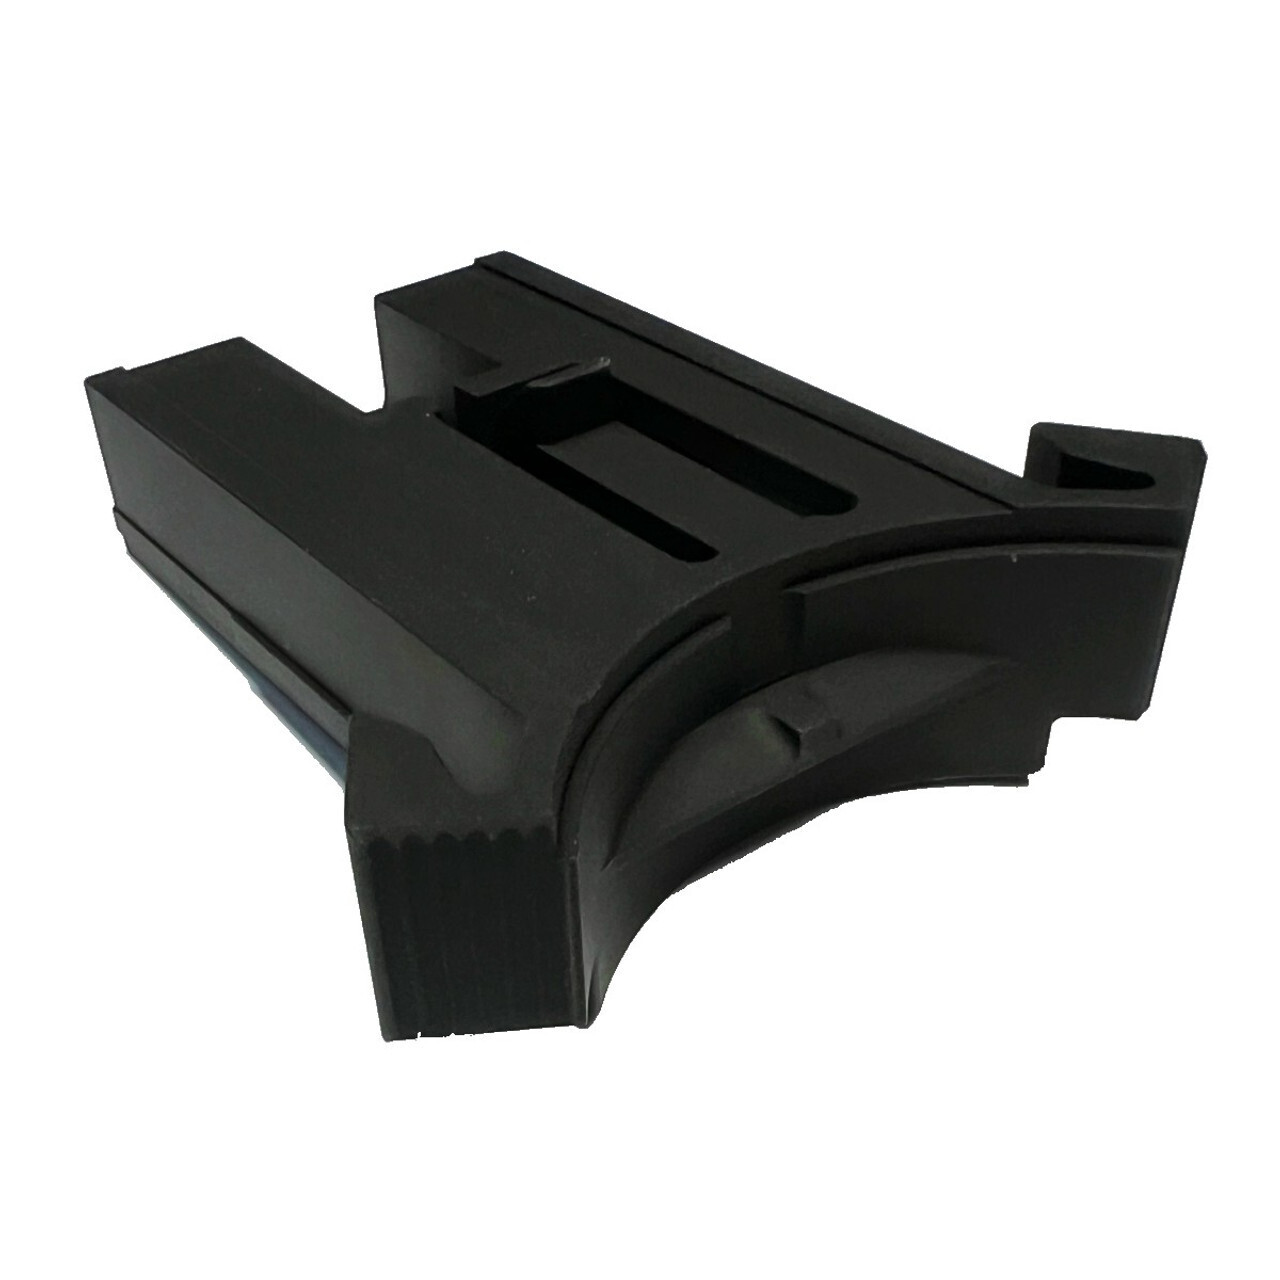 P90/PS90 Aluminum Extended Magazine Release by Dorin Technologies